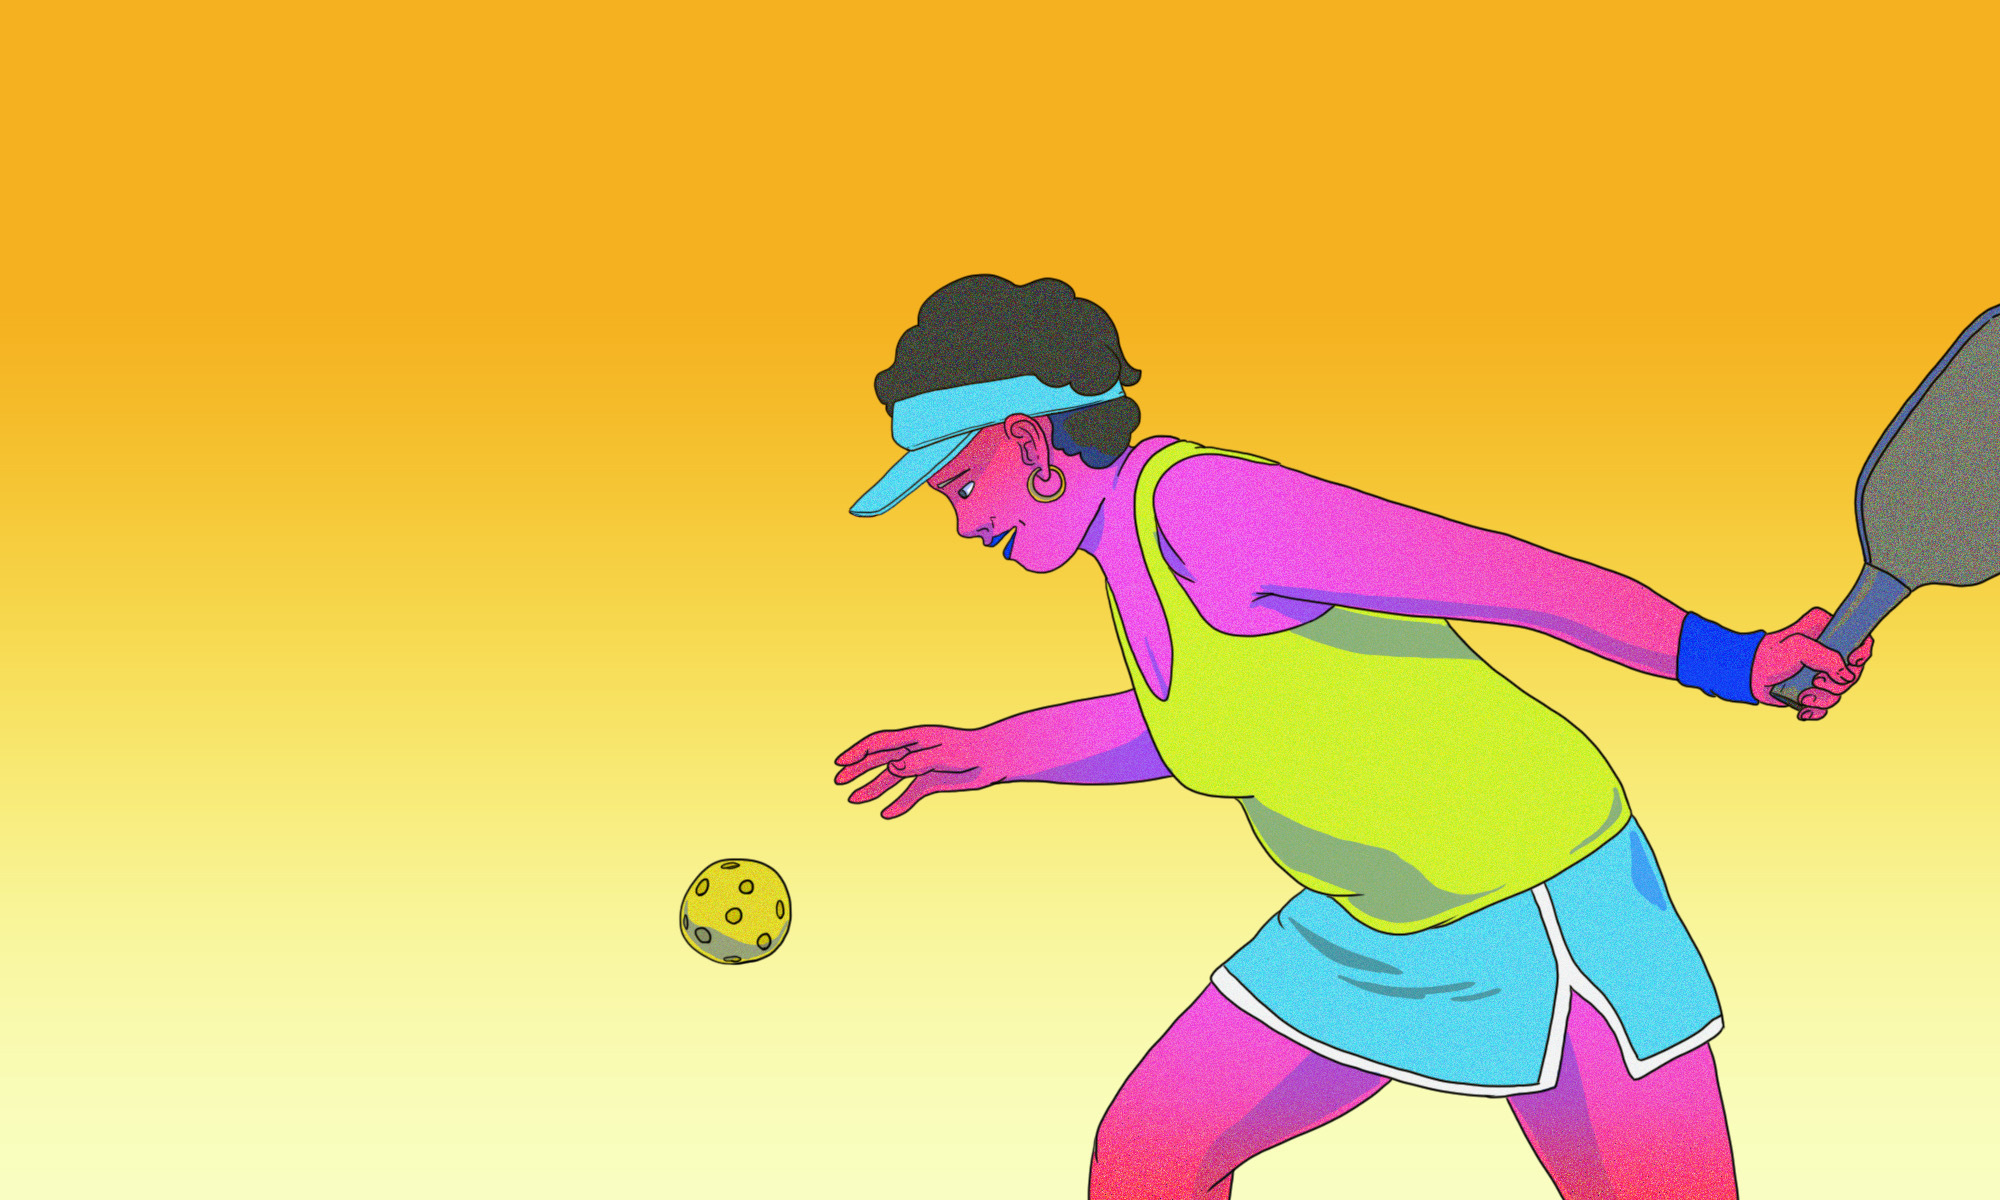 Pickleball: It's not just for adults. Young players now the